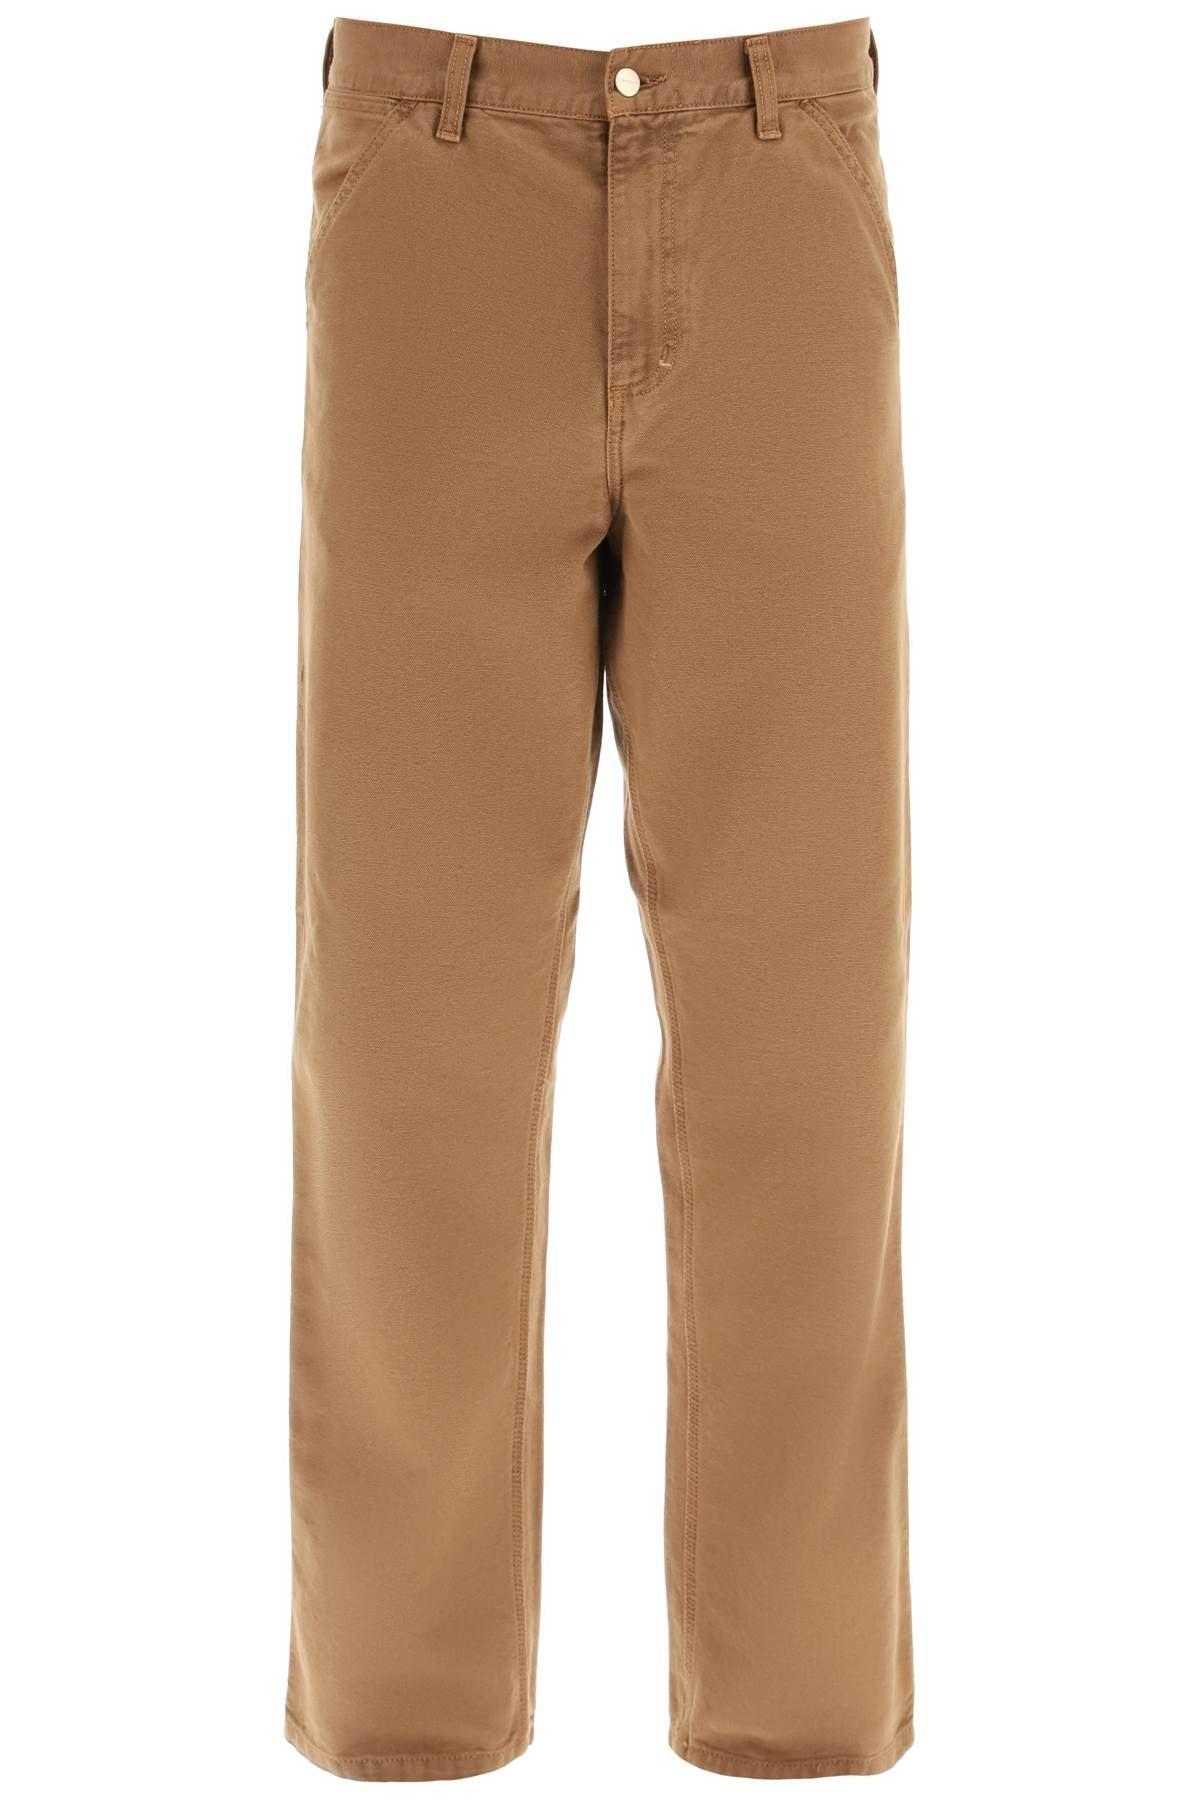 Carhartt WIP Work Pockets Canvas Pants in Brown for Men | Lyst